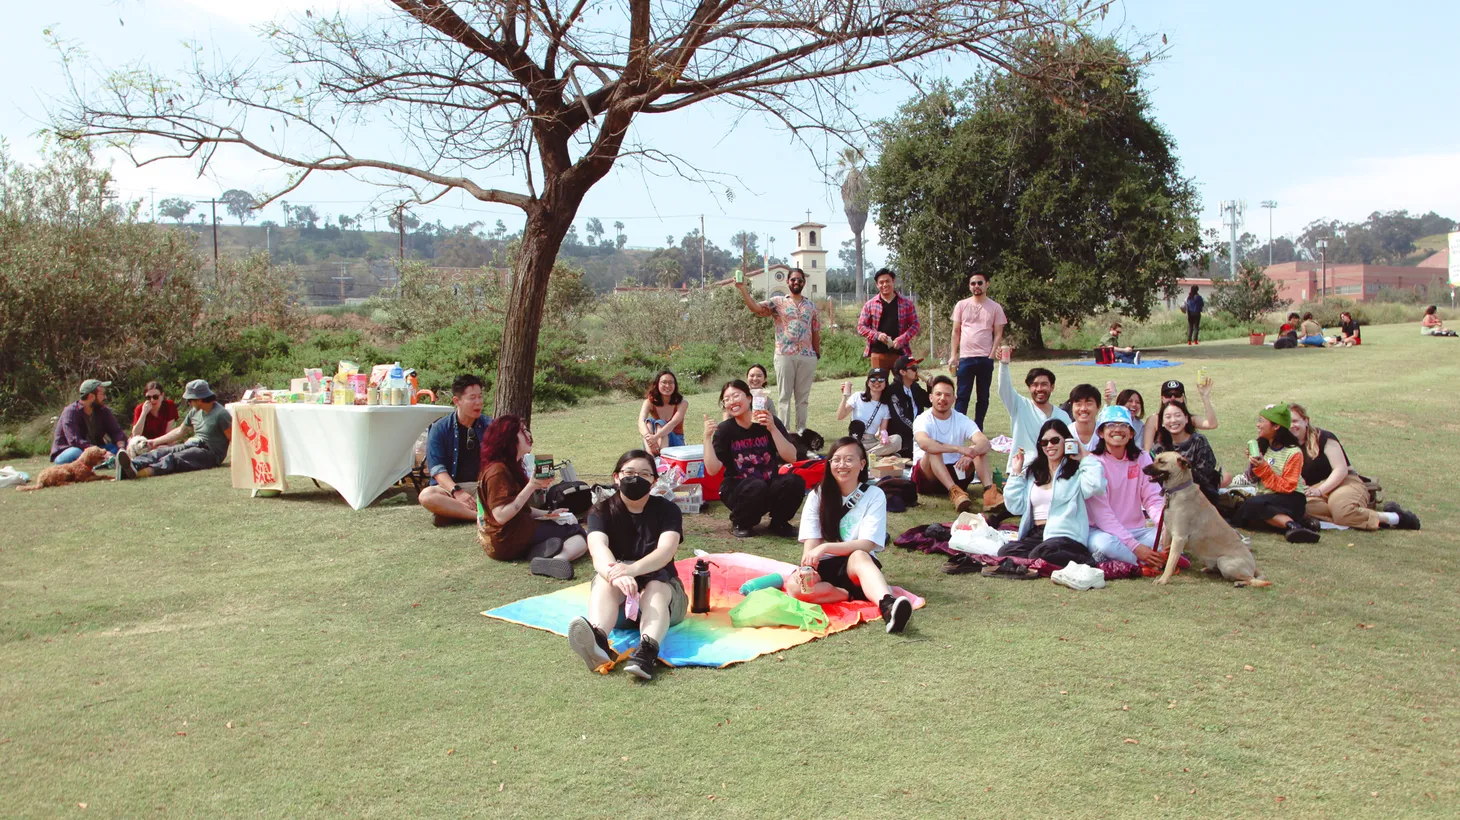 Outdoor Asian LA gathers for a picnic at LA State Historic Park.